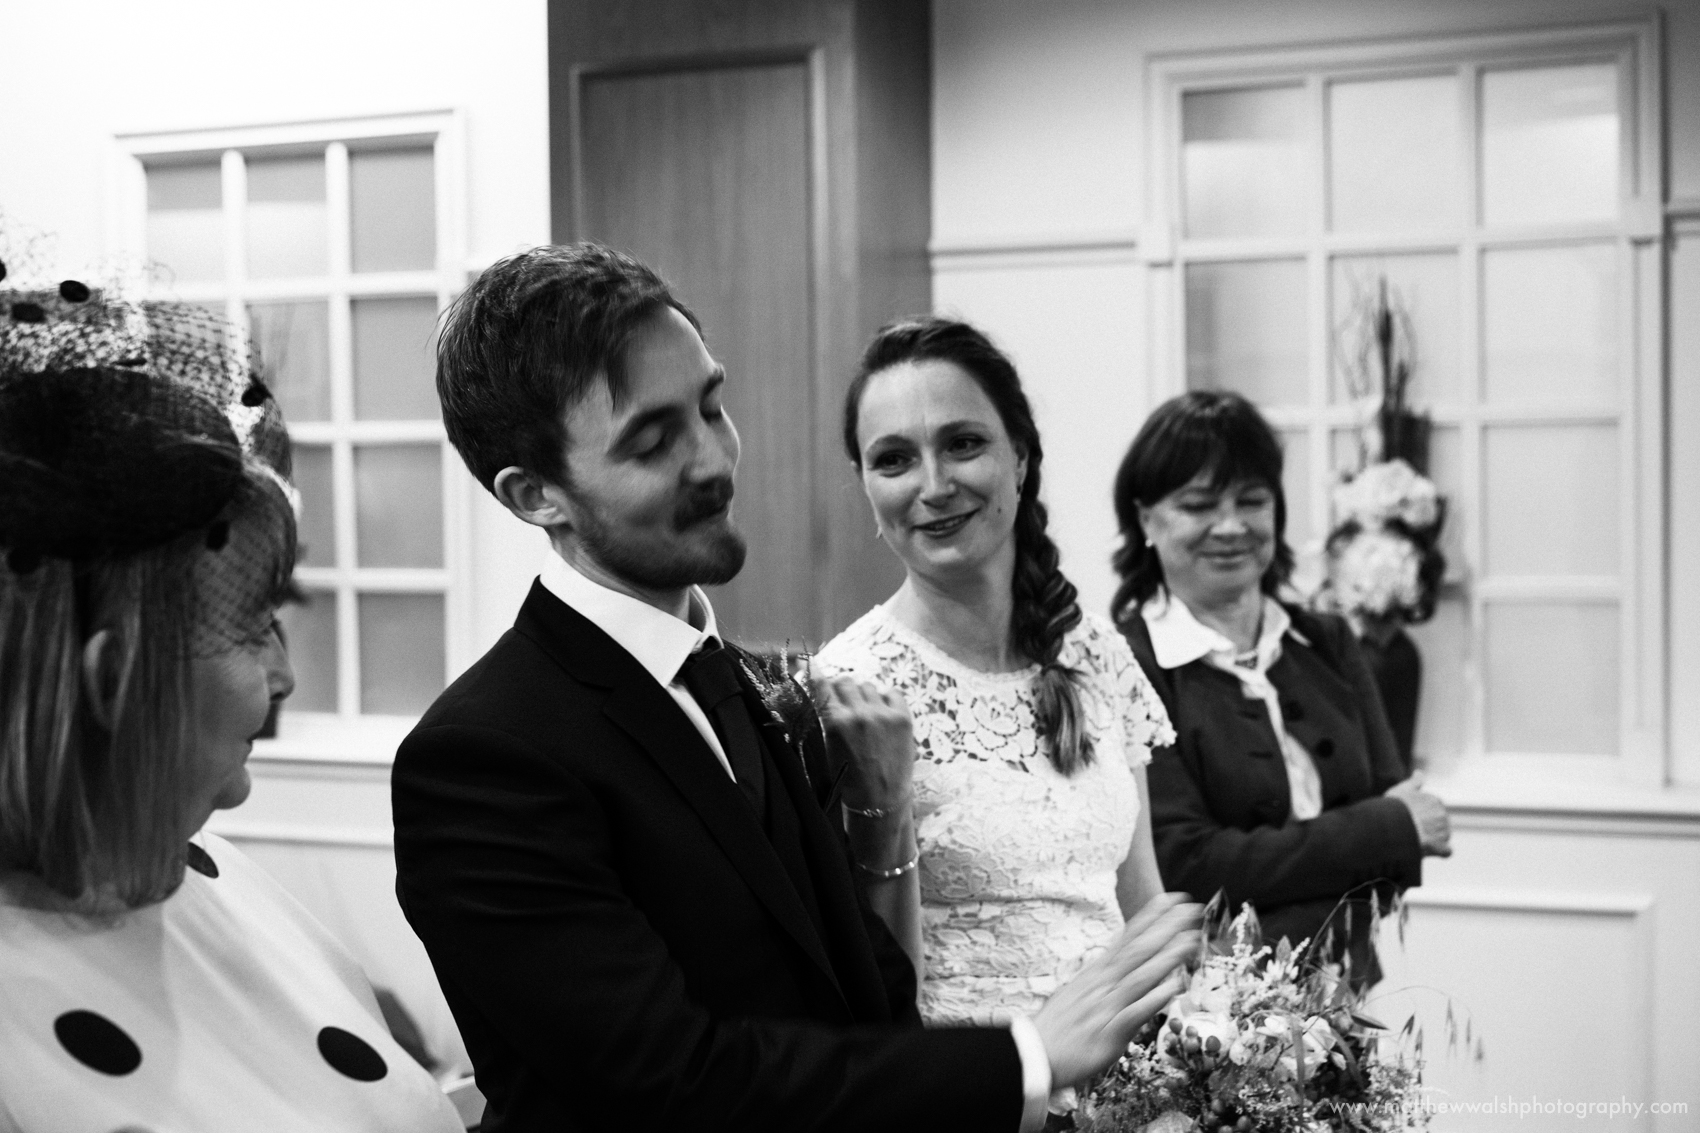 A black and white photograph of the bride and groom sharing their wedding vows